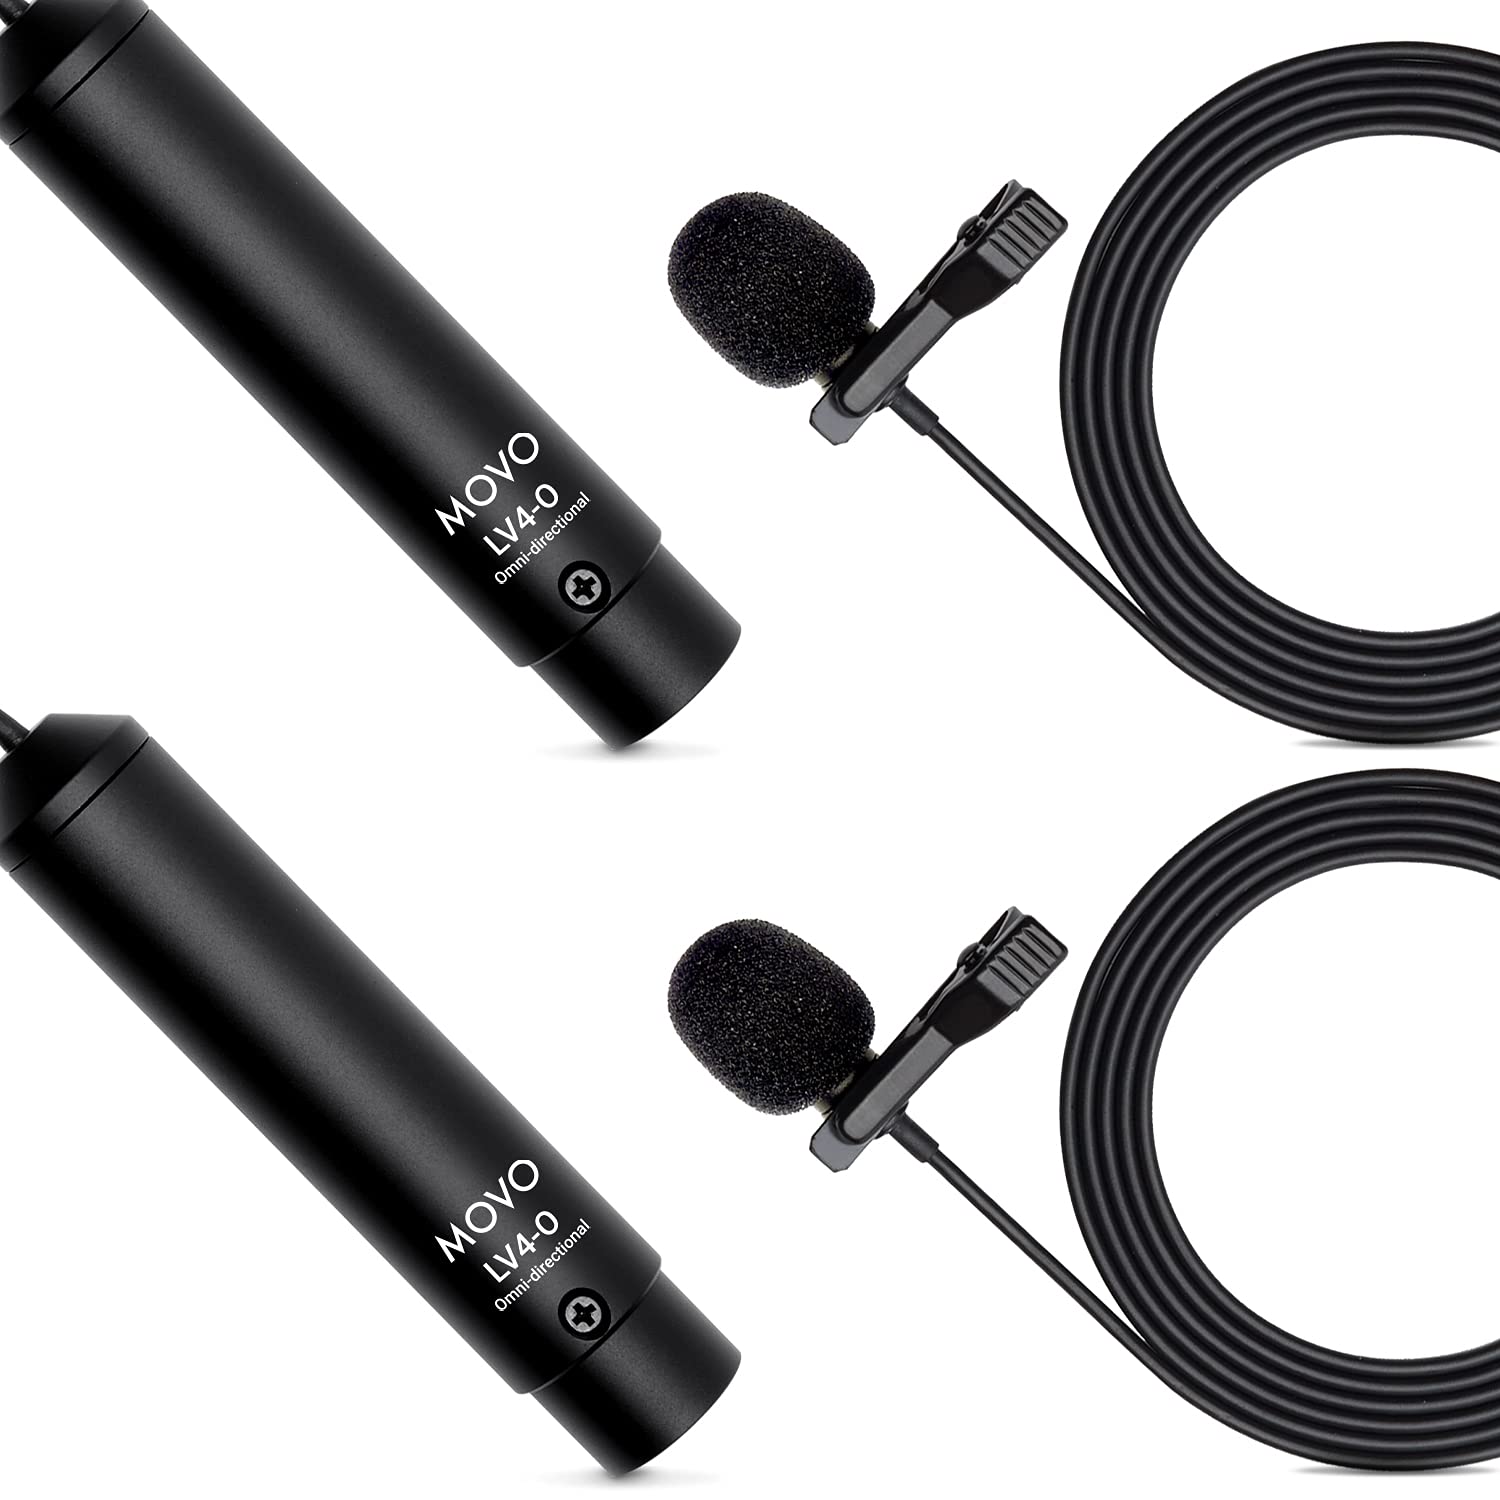 Movo LV4-O2 XLR Phantom Power Omnidirectional Lavalier Microphone Set, with Lapel Mic Clips and Windscreens - Perfect Lapel Microphone for Video Recording, Podcast, Interview, YouTube Production  - Like New